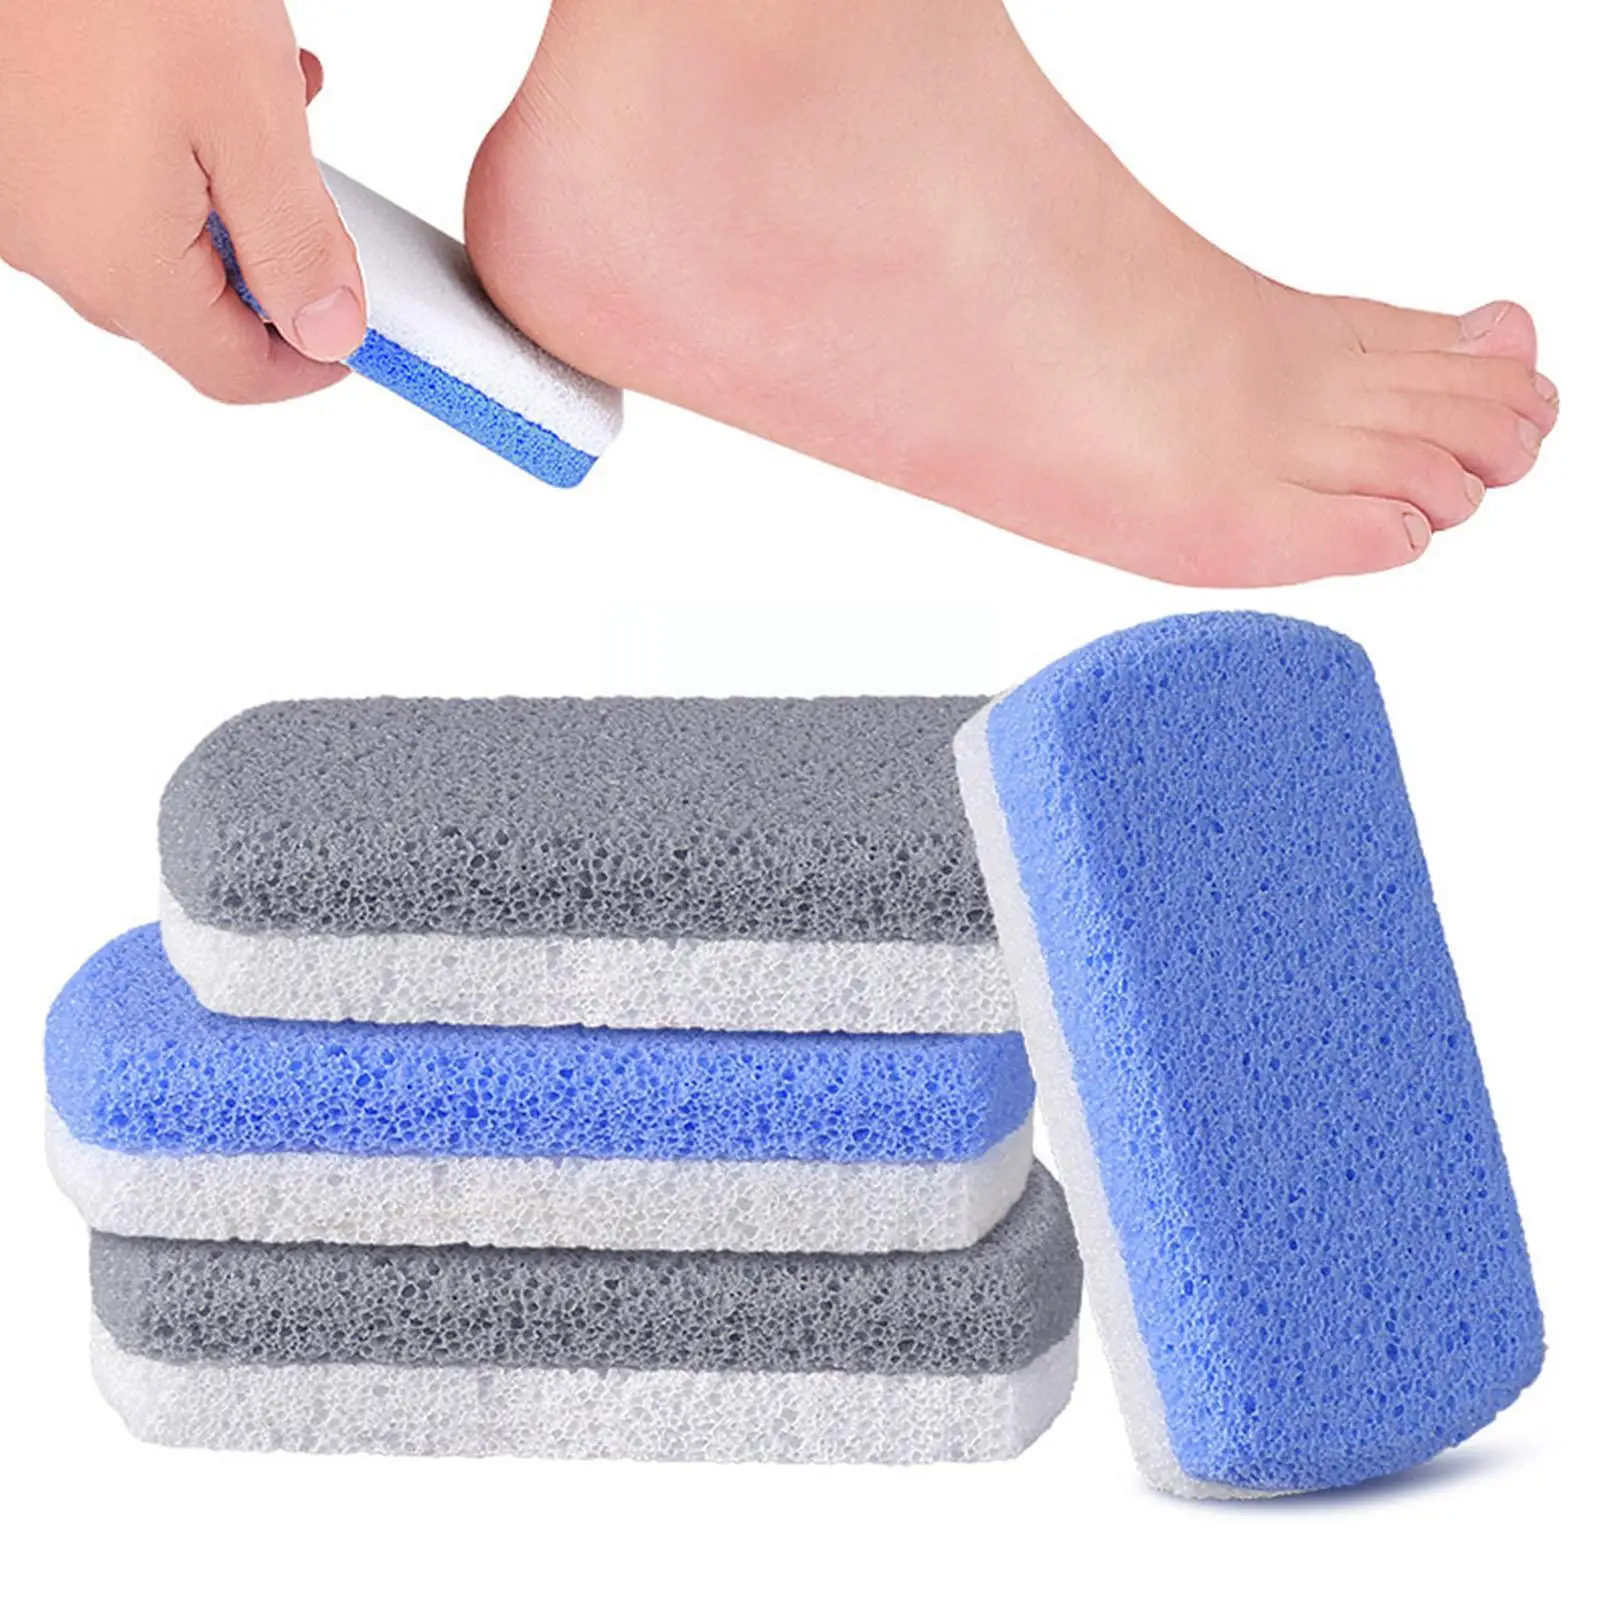 

Foot Pumice Stone Double-sided Foot Sanding Block Dead Calluses Manicure Remover Grinding Pedicure Hands Feet Skin Nails Bl G8I3